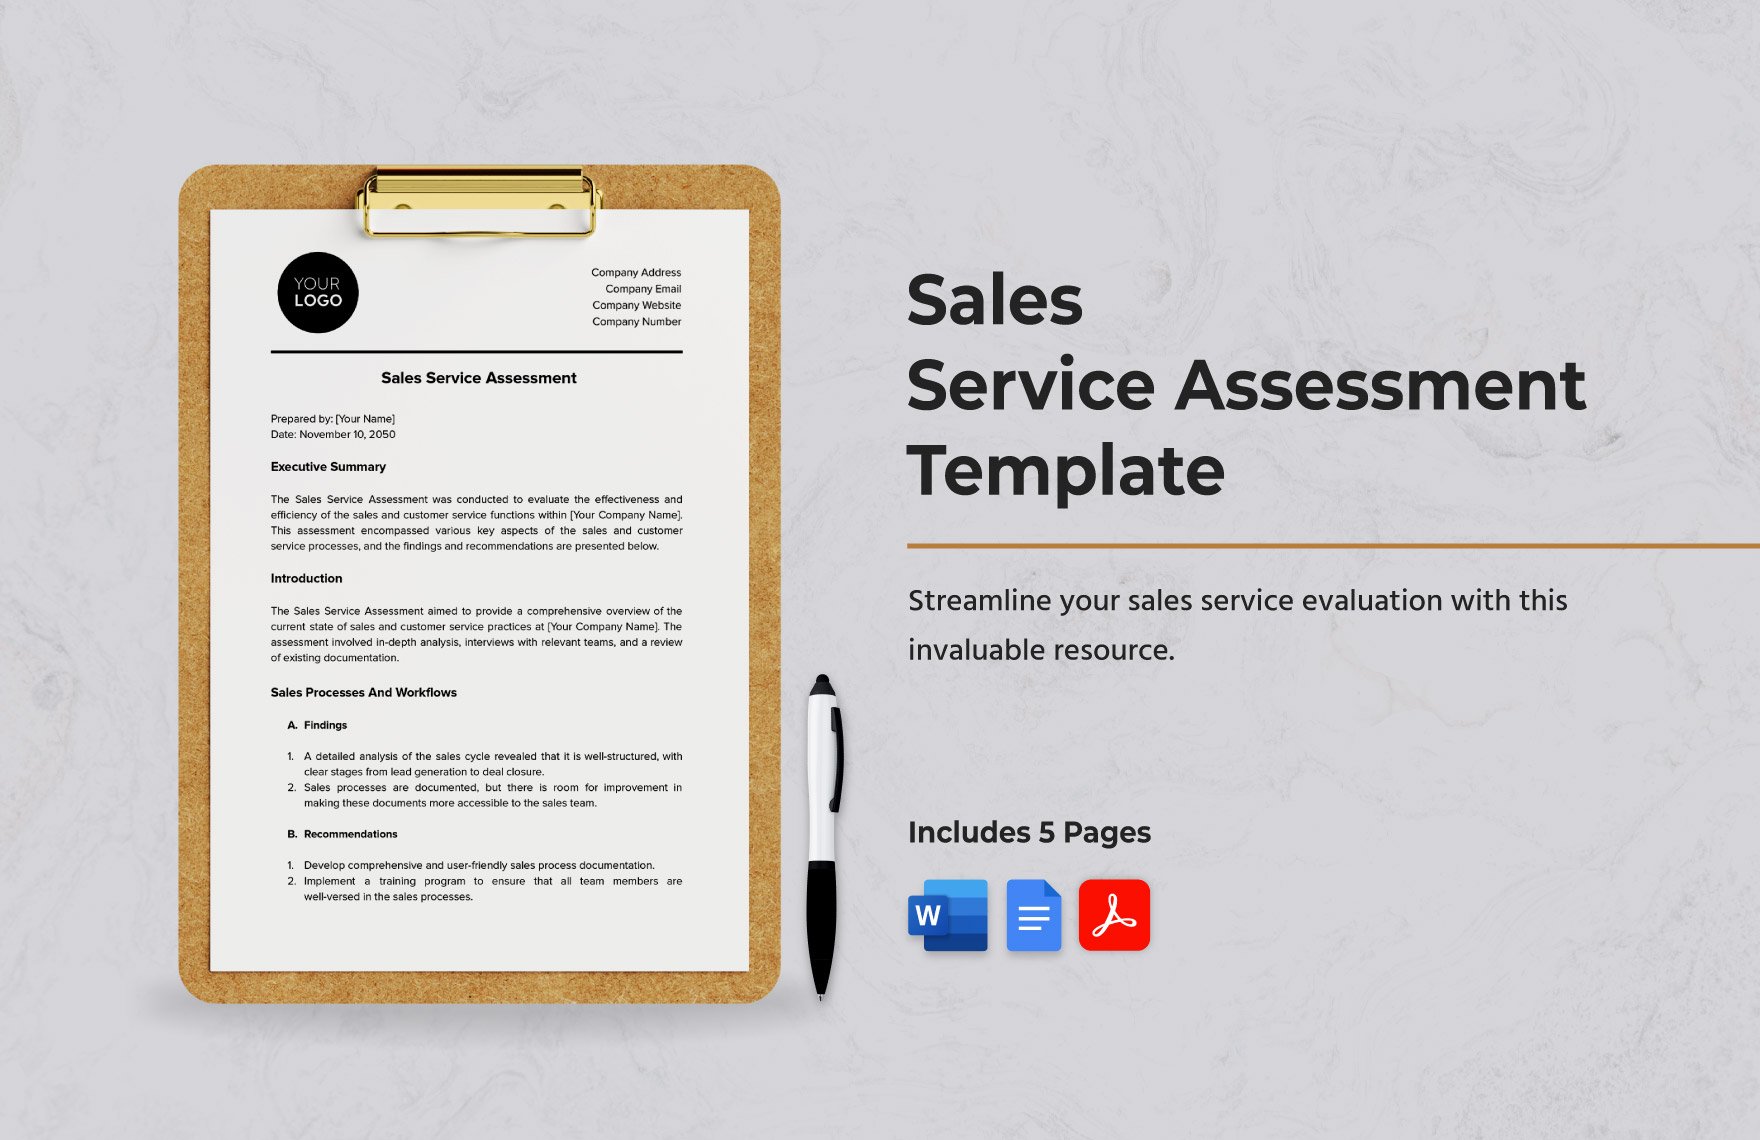 Sales Service Assessment Template